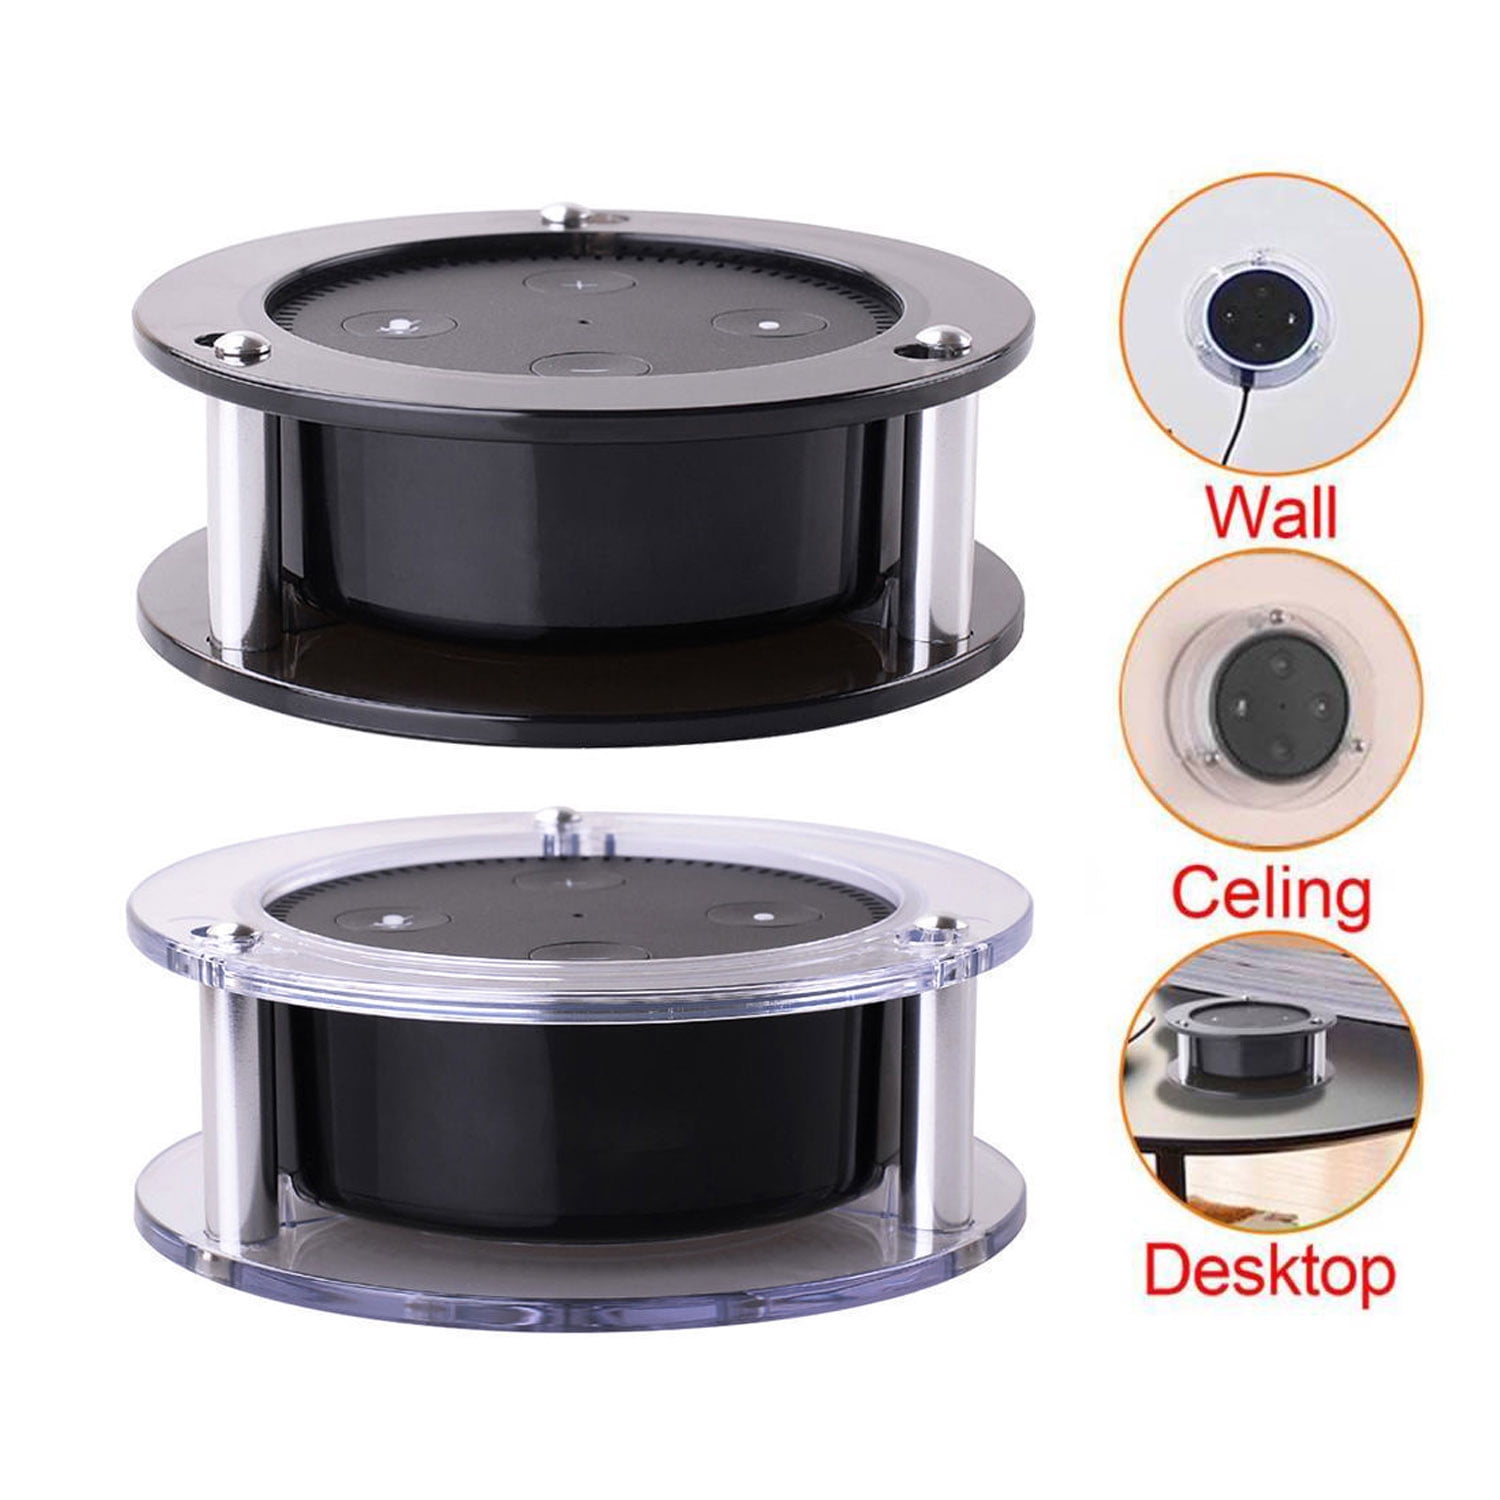 R SODIAL Acrylic Speaker Stand Ceiling Wall Mount Protective Holder for  ech dot 2nd Generation - black